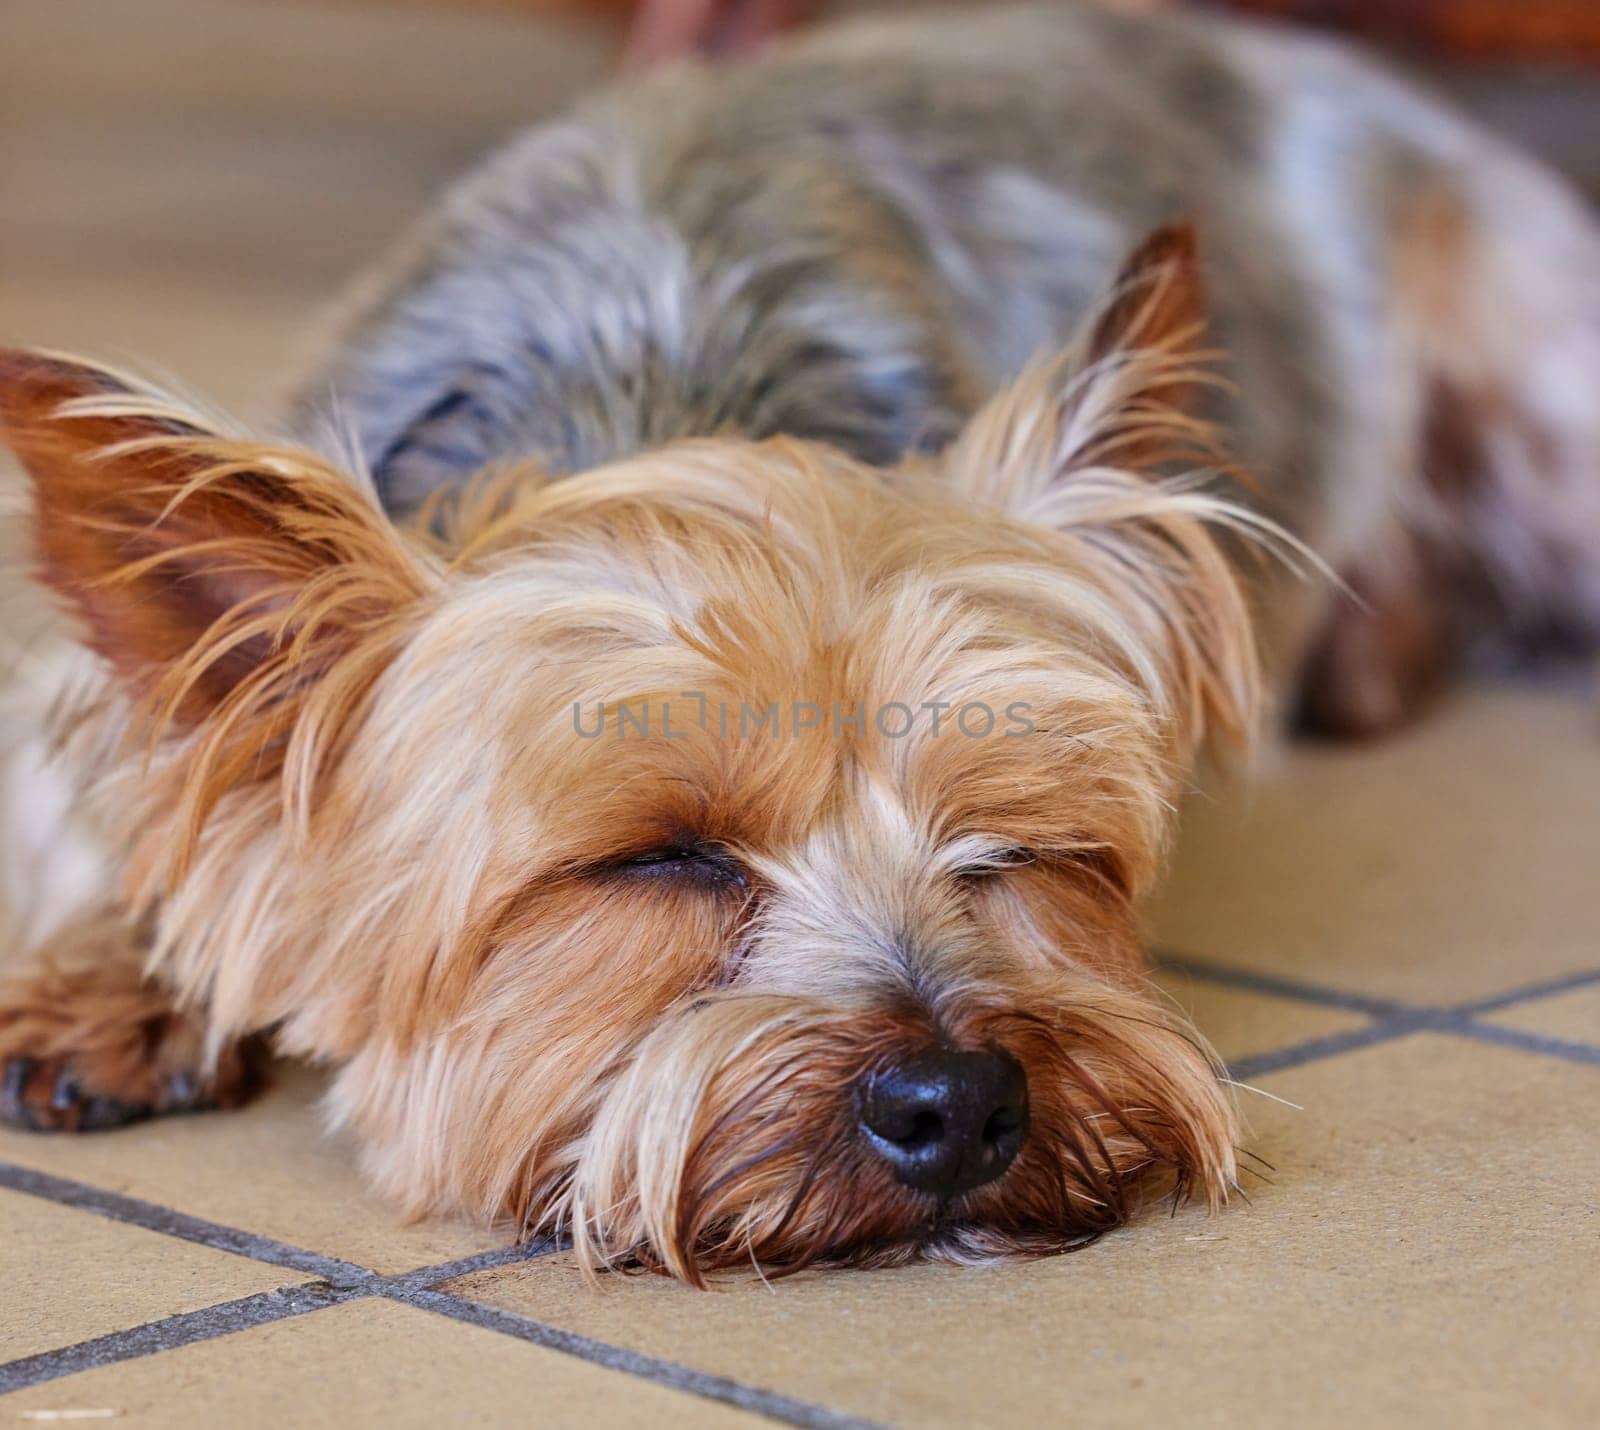 Sleeping puppy, dog and pet in the home, relax on kitchen floor and comfort with mans best friend. Adoption, foster and animal care, tired domestic yorkshire terrier with nap or asleep for wellness.